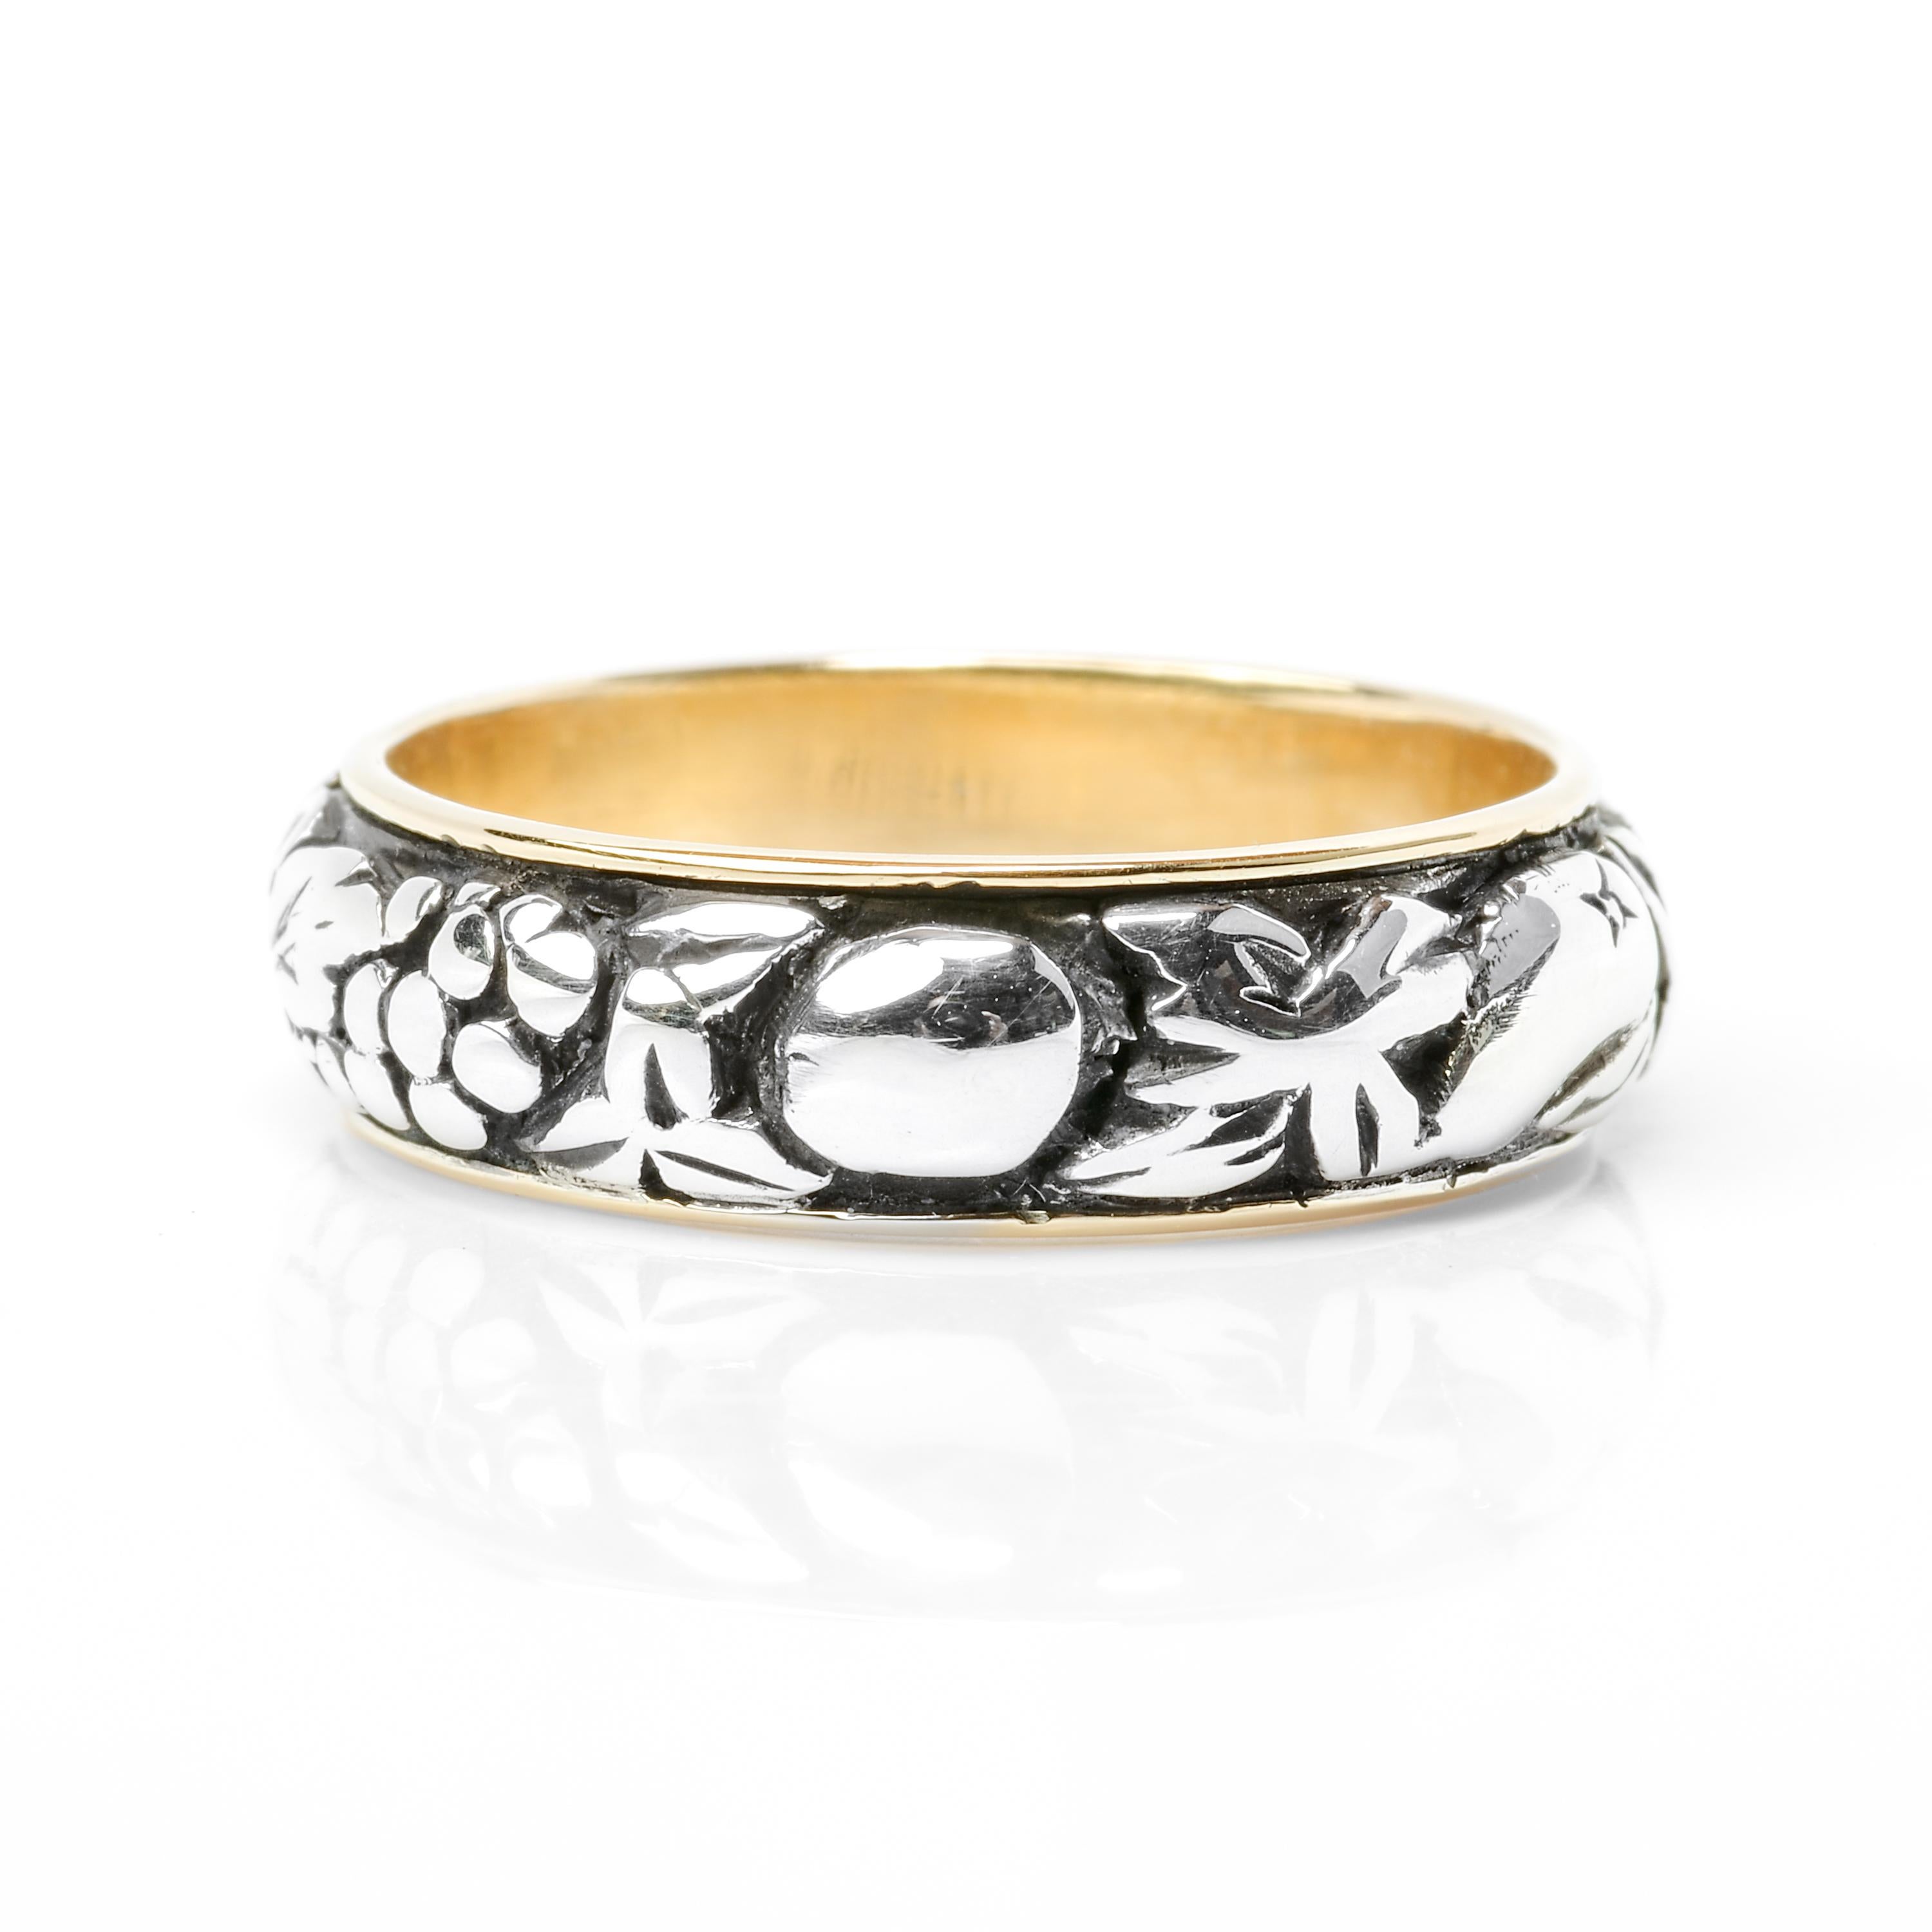 A rare, distinctive, and magnificent wedding band created by the founder of one of the world's most iconic and prestigious jewelry houses: Mario Buccellati. Buccellati jewels are known for their extraordinary metalwork, made famous by techniques